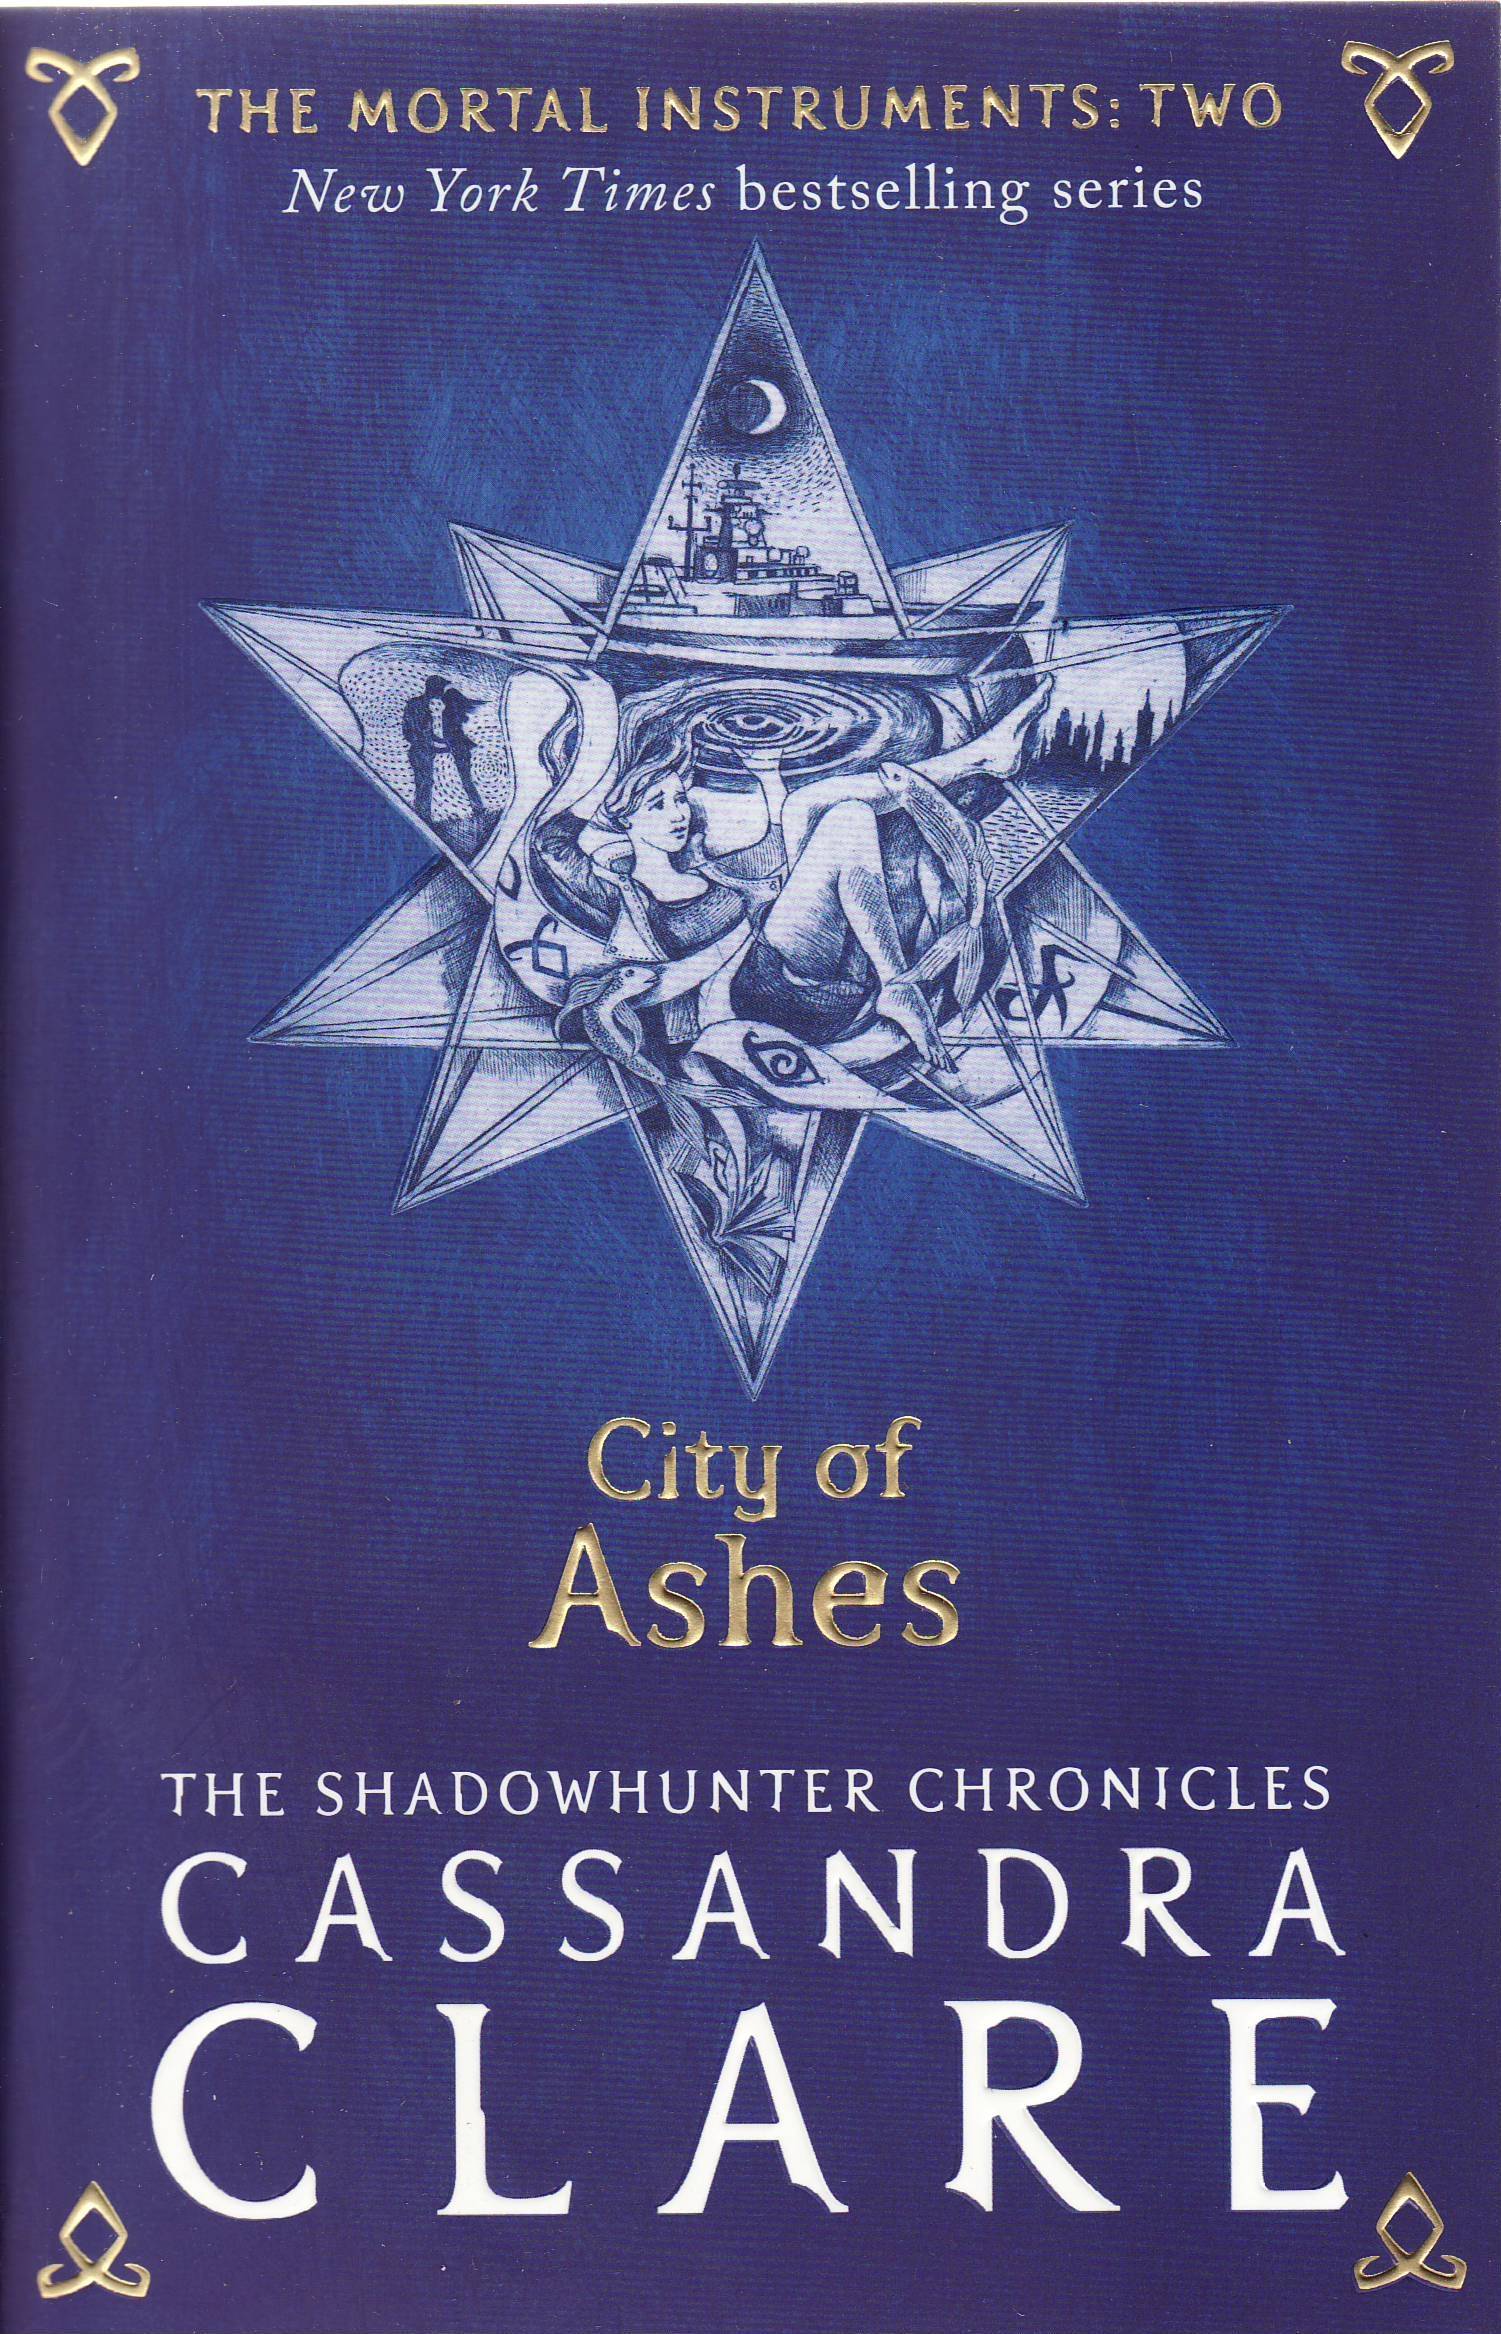 Mortal instruments 2: city of ashes